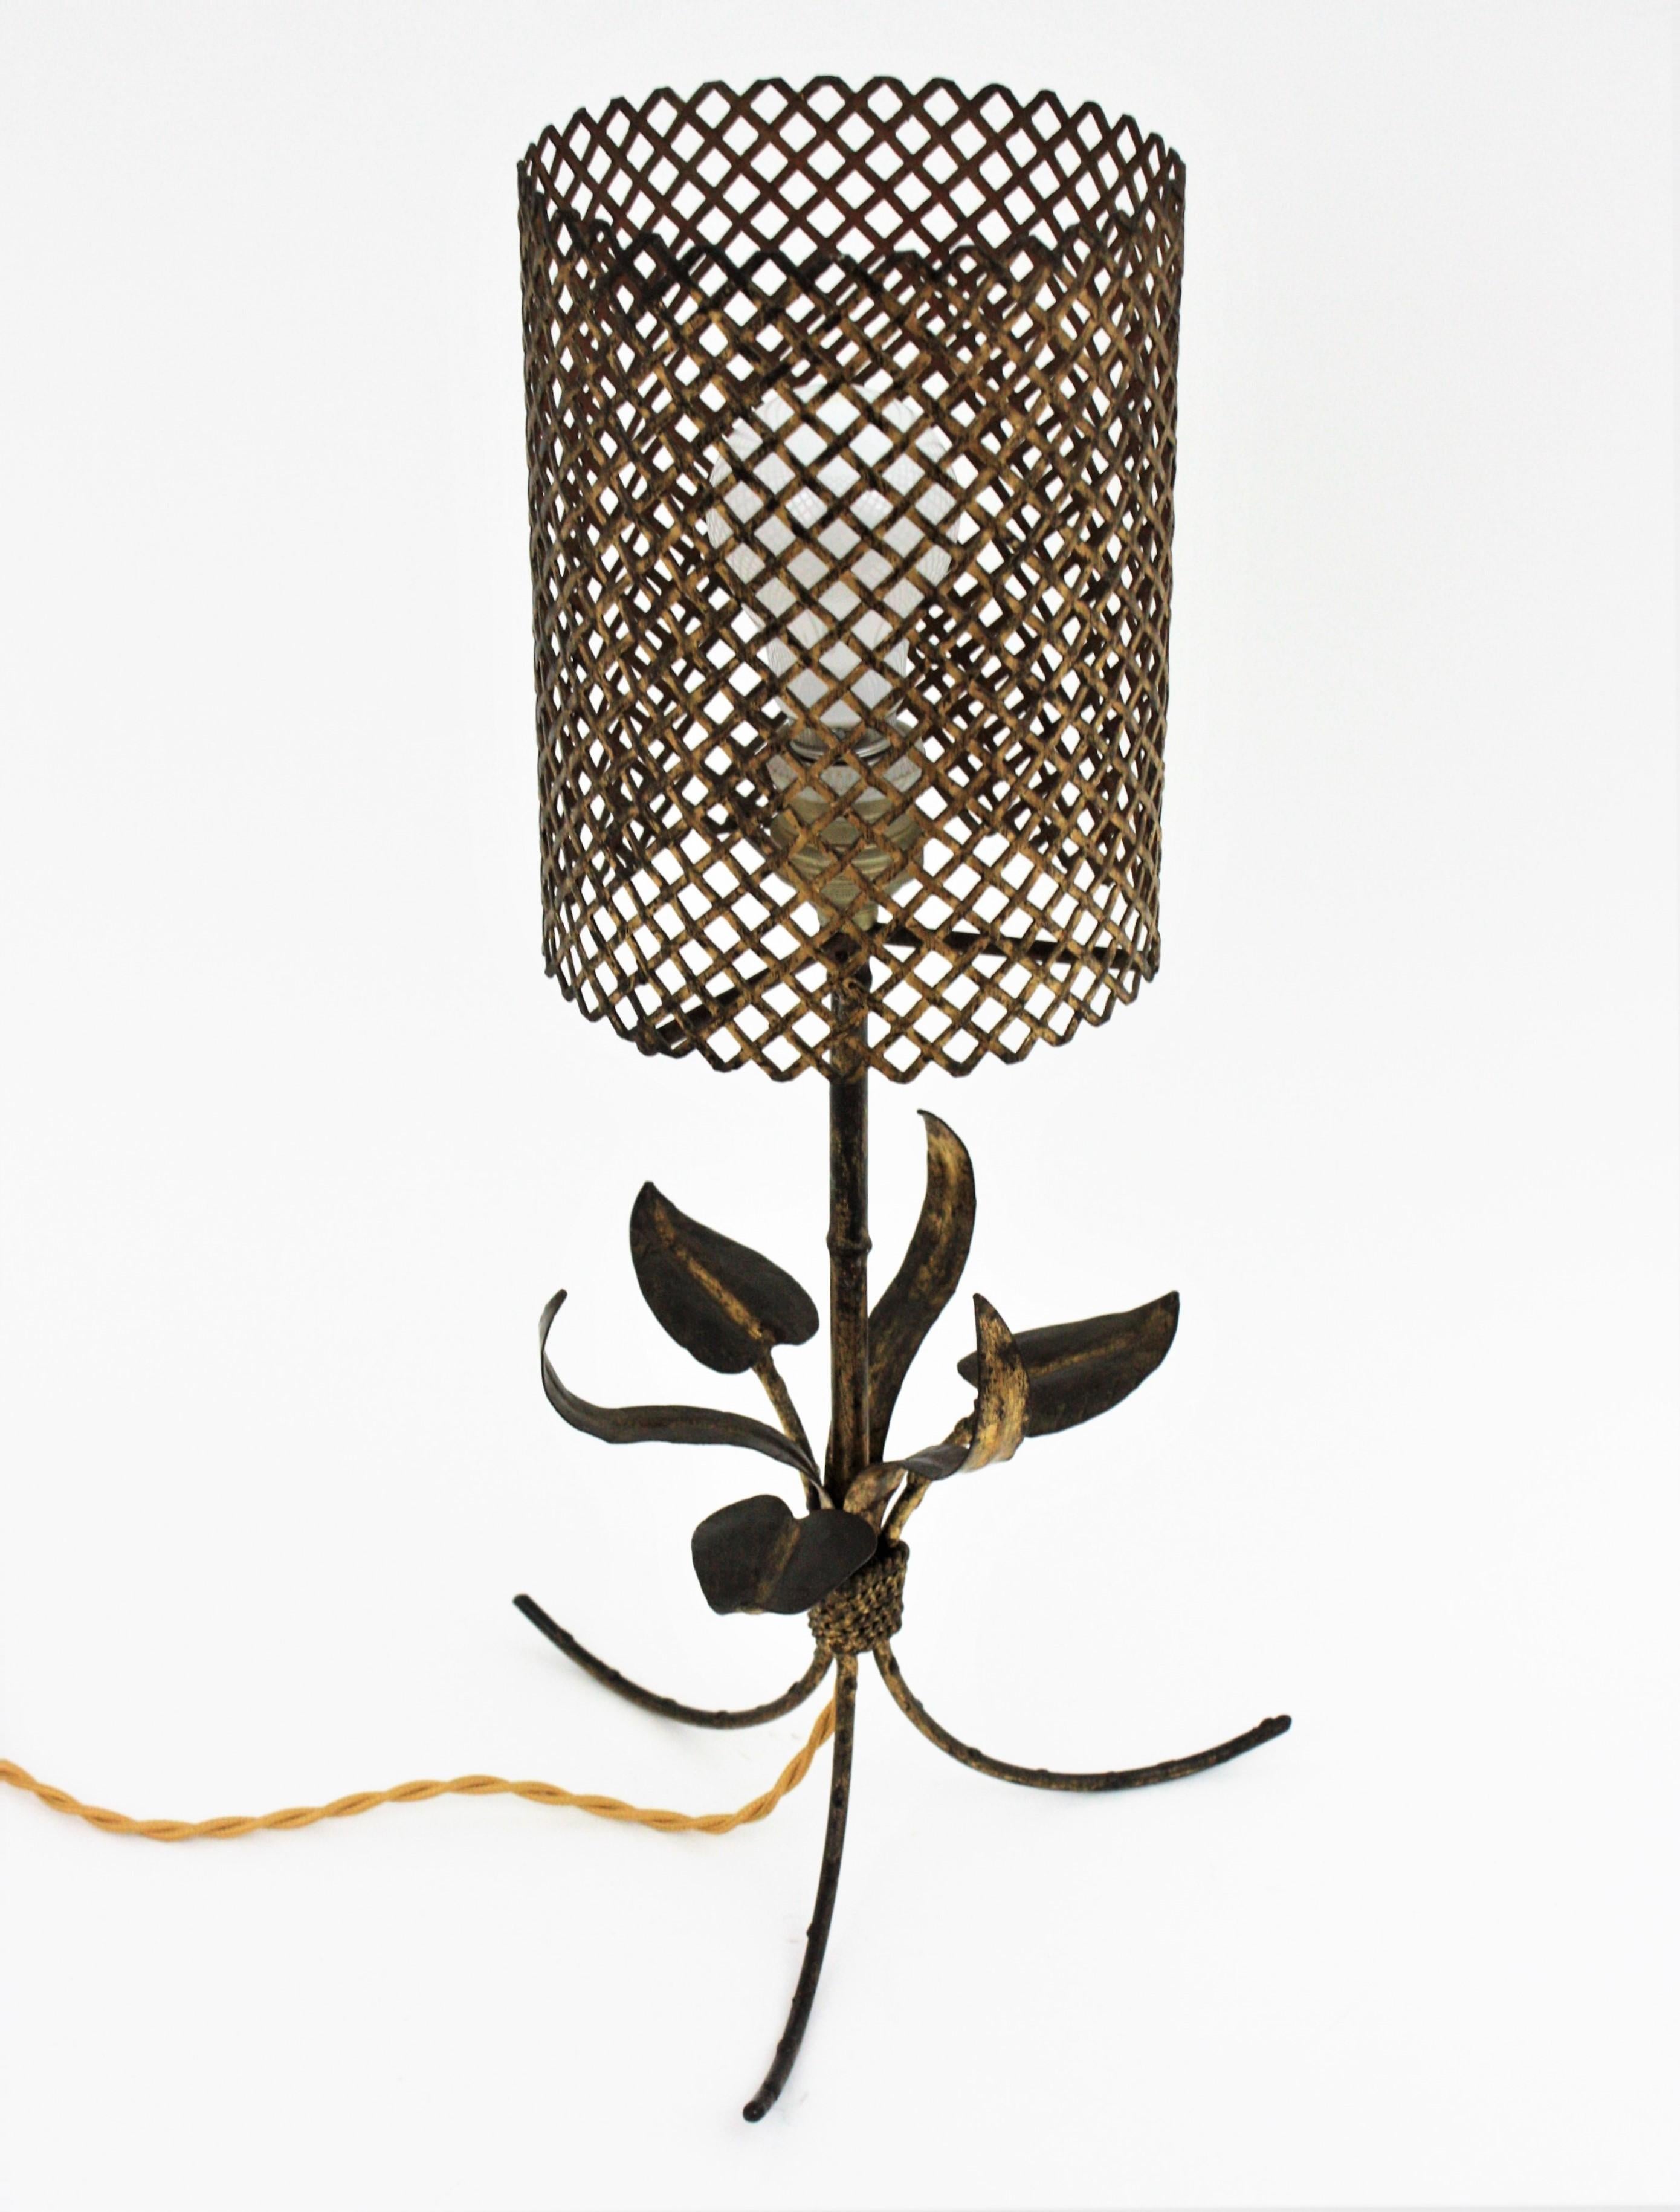 French Faux Bamboo Foliage Tripod Table Lamp in Gilt Metal, 1940s For Sale 5